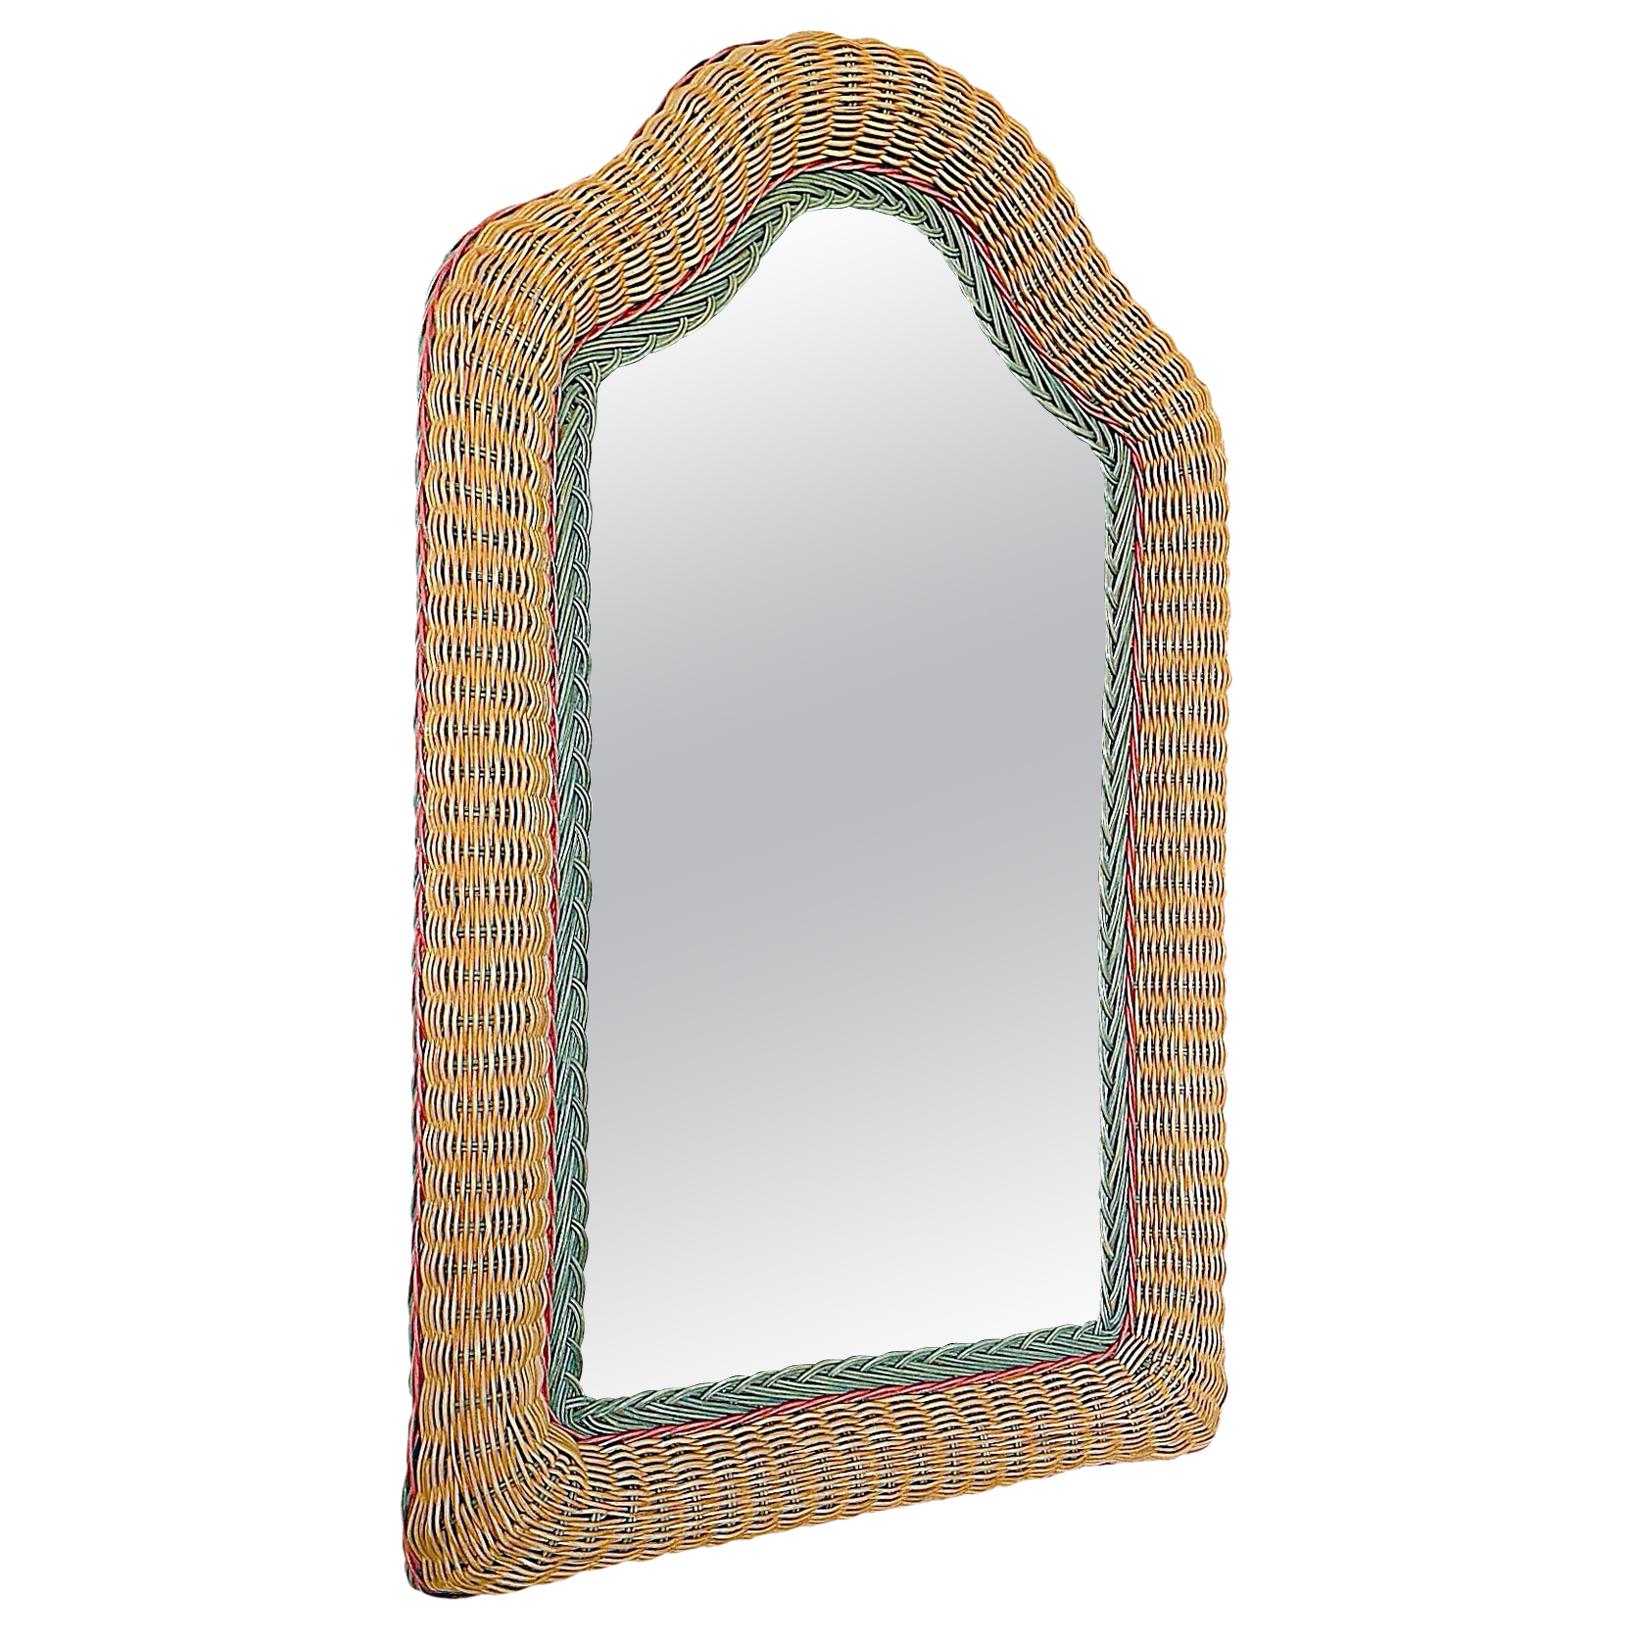 Artisanal Wicker Rattan Midcentury Arched Wall Mirror, 1960s, France